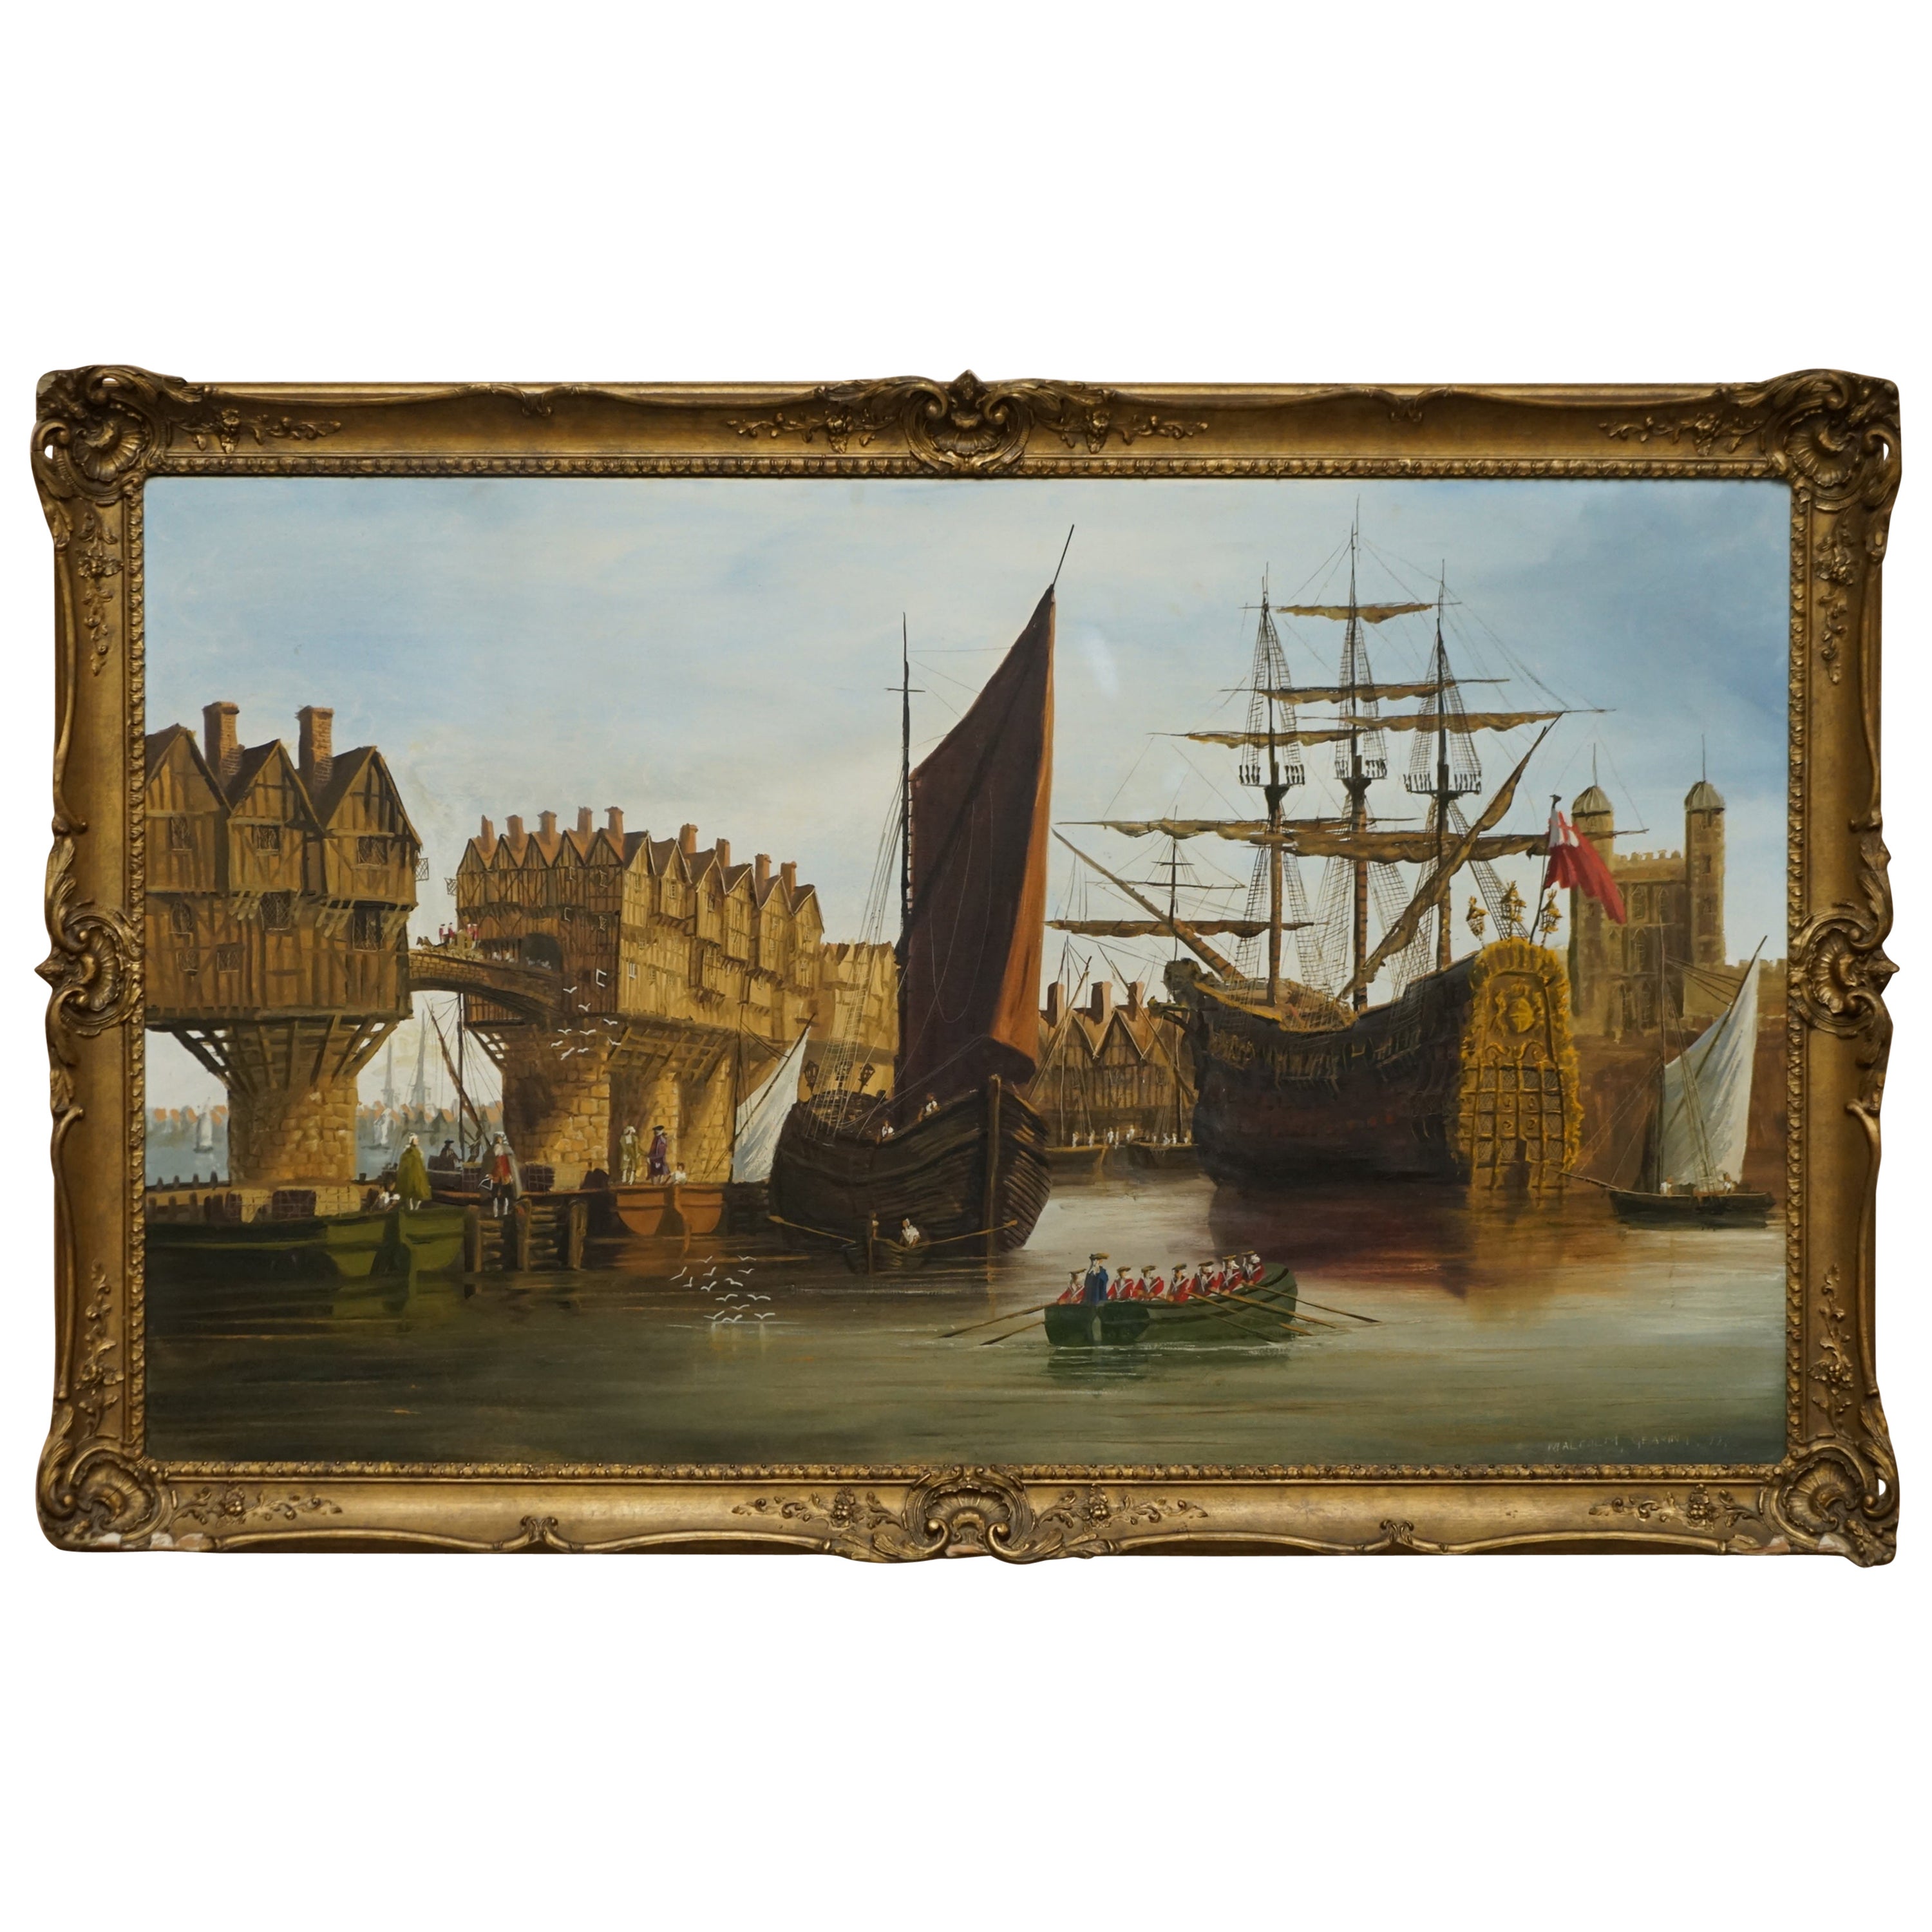 Very Large Decorative Oil on Canvas of a Victorian Naval Scene on the Thames